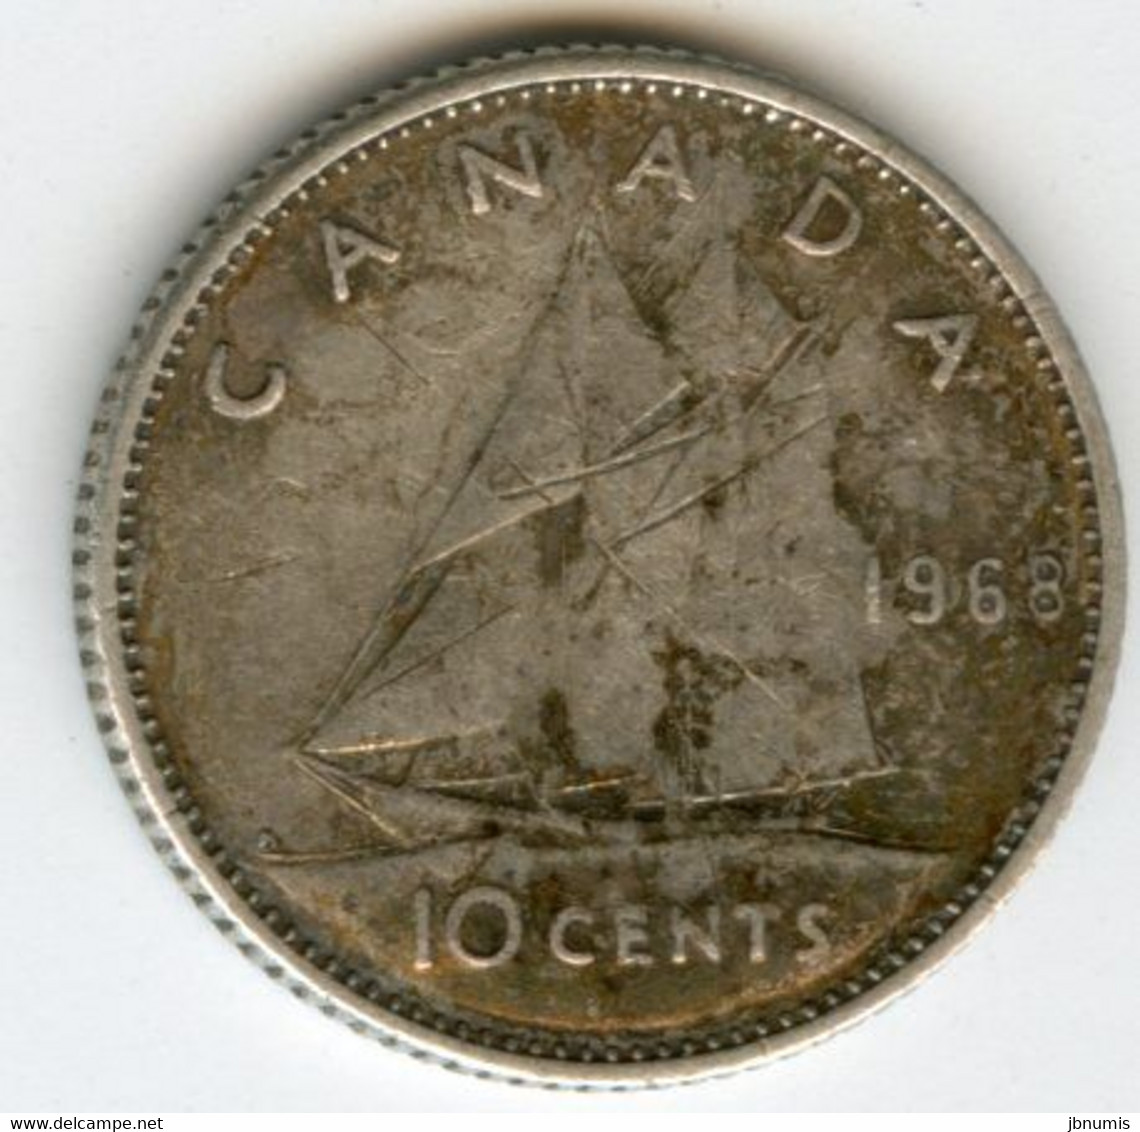 Canada 10 Cents 1968 Argent KM 72 - Canada